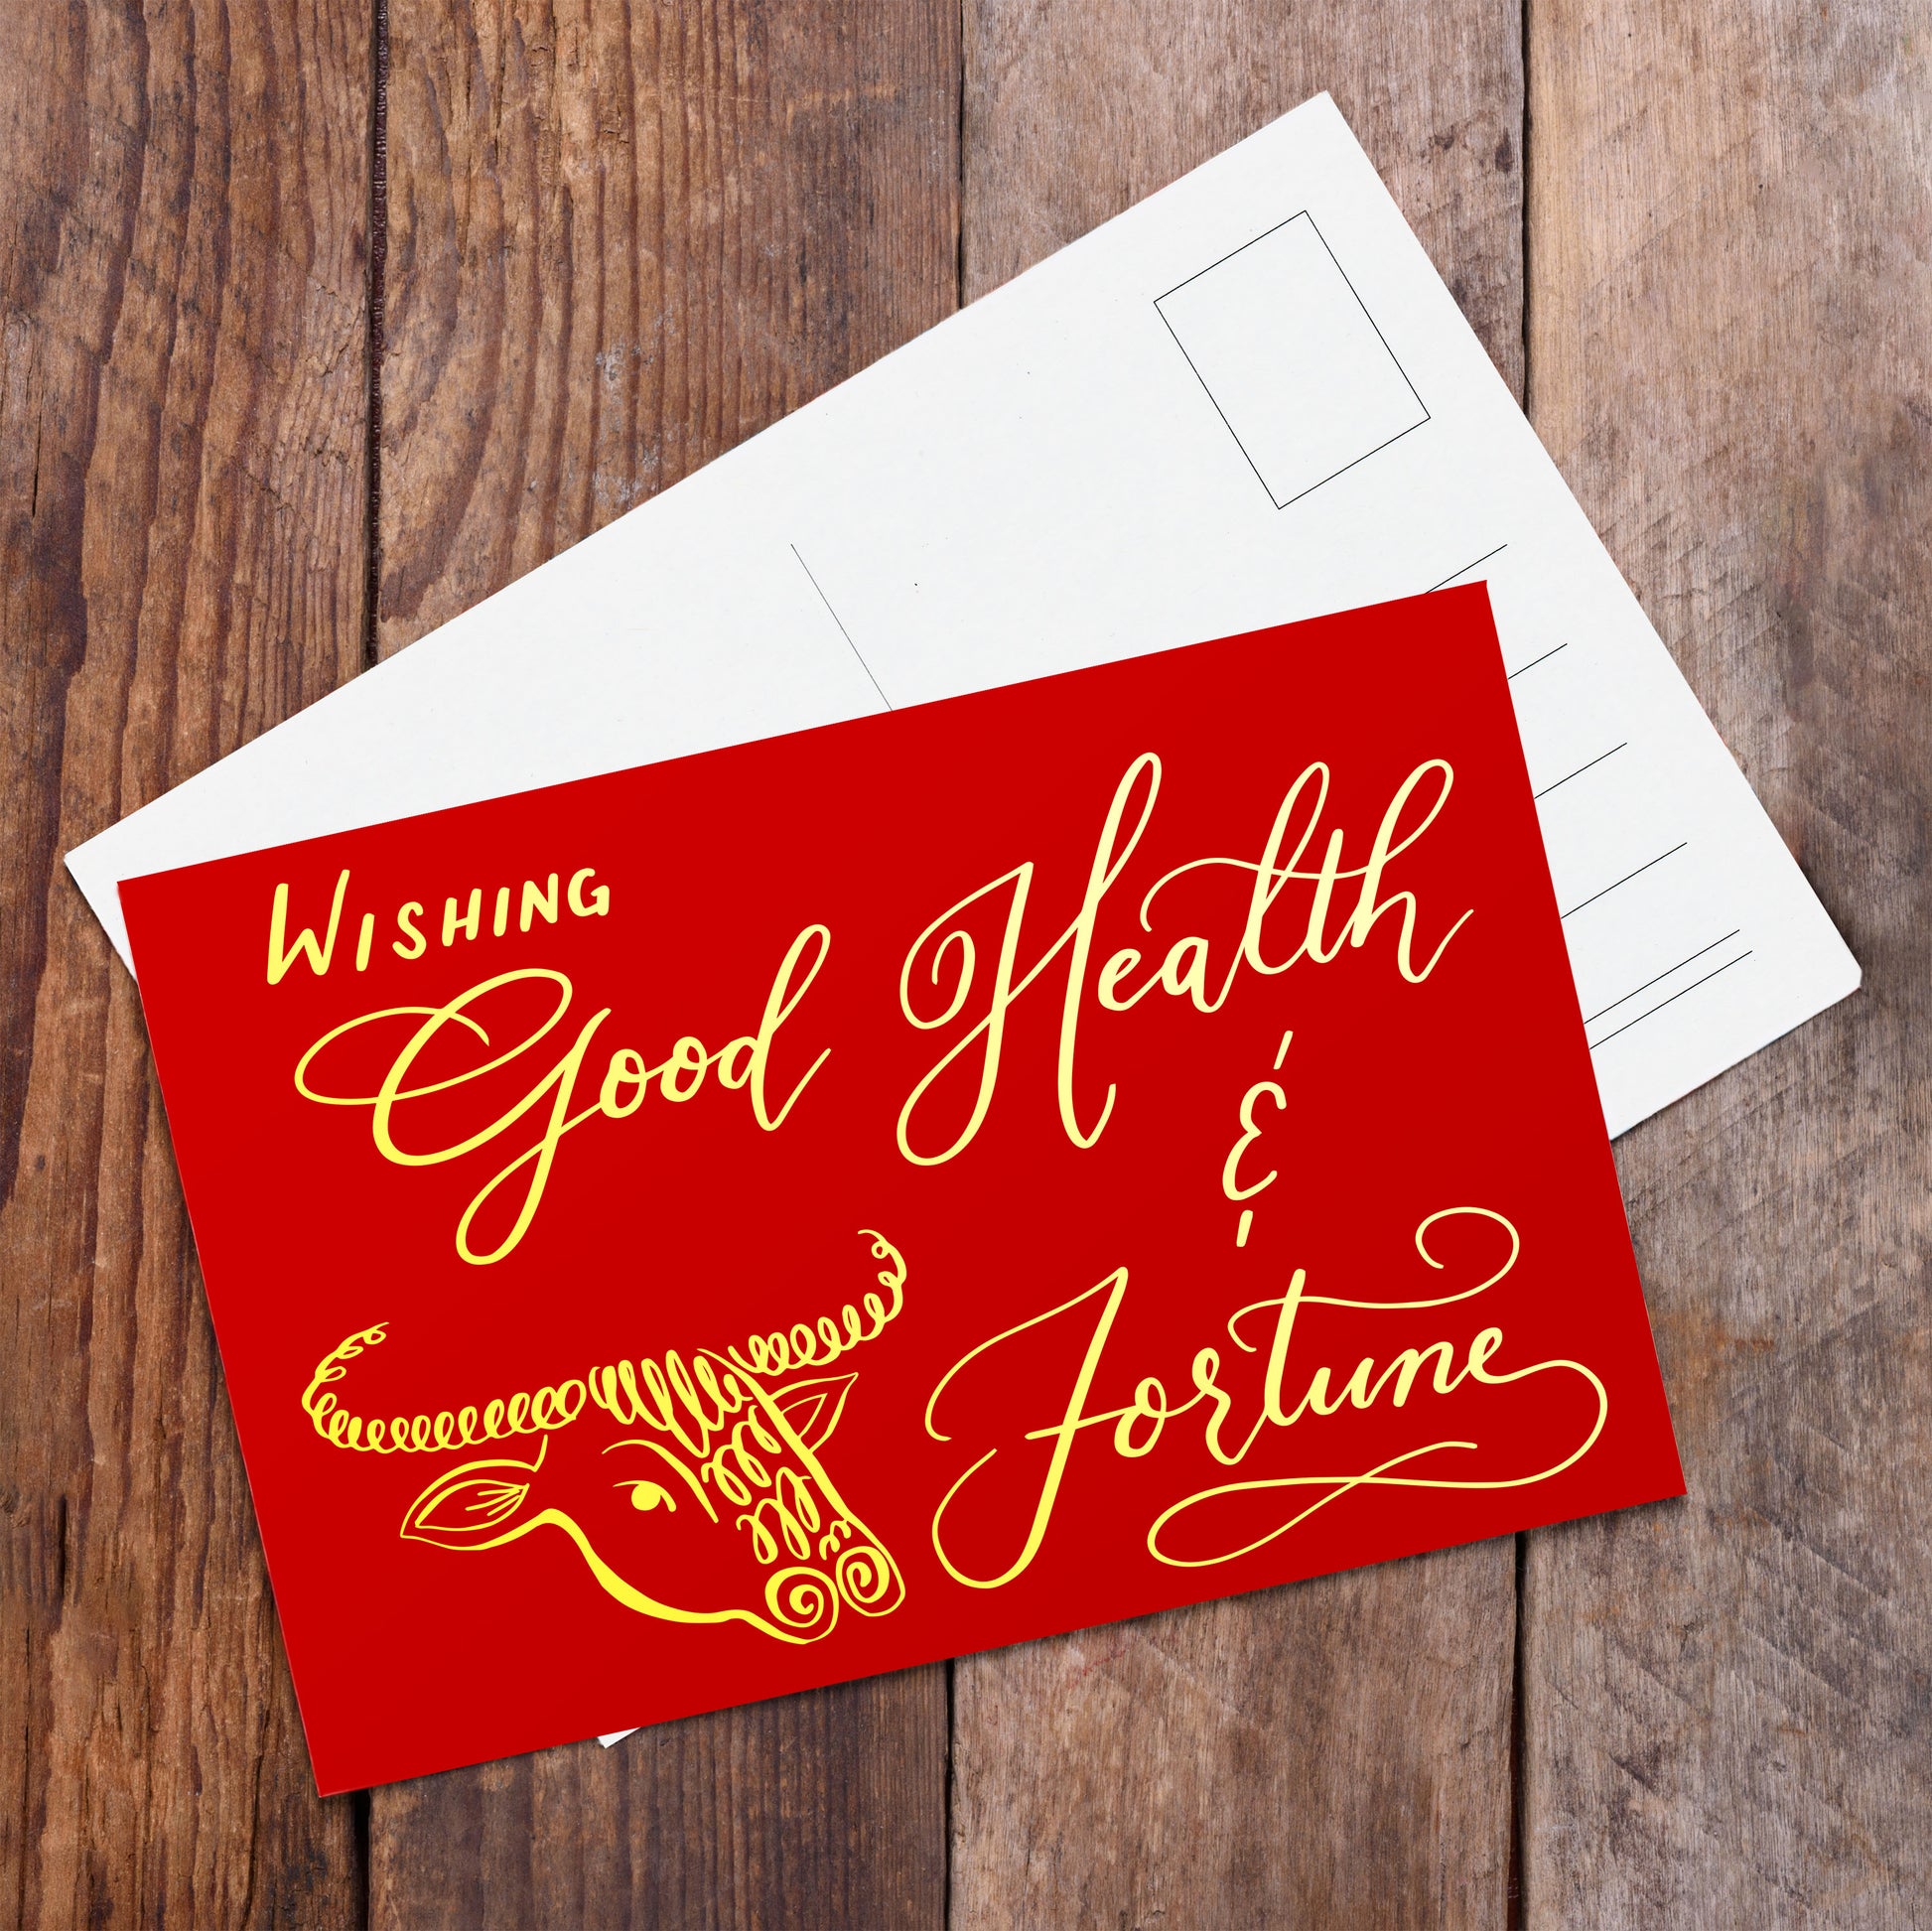 A lifestyle view of the postcard: "Wishing Good Health & Fortune"